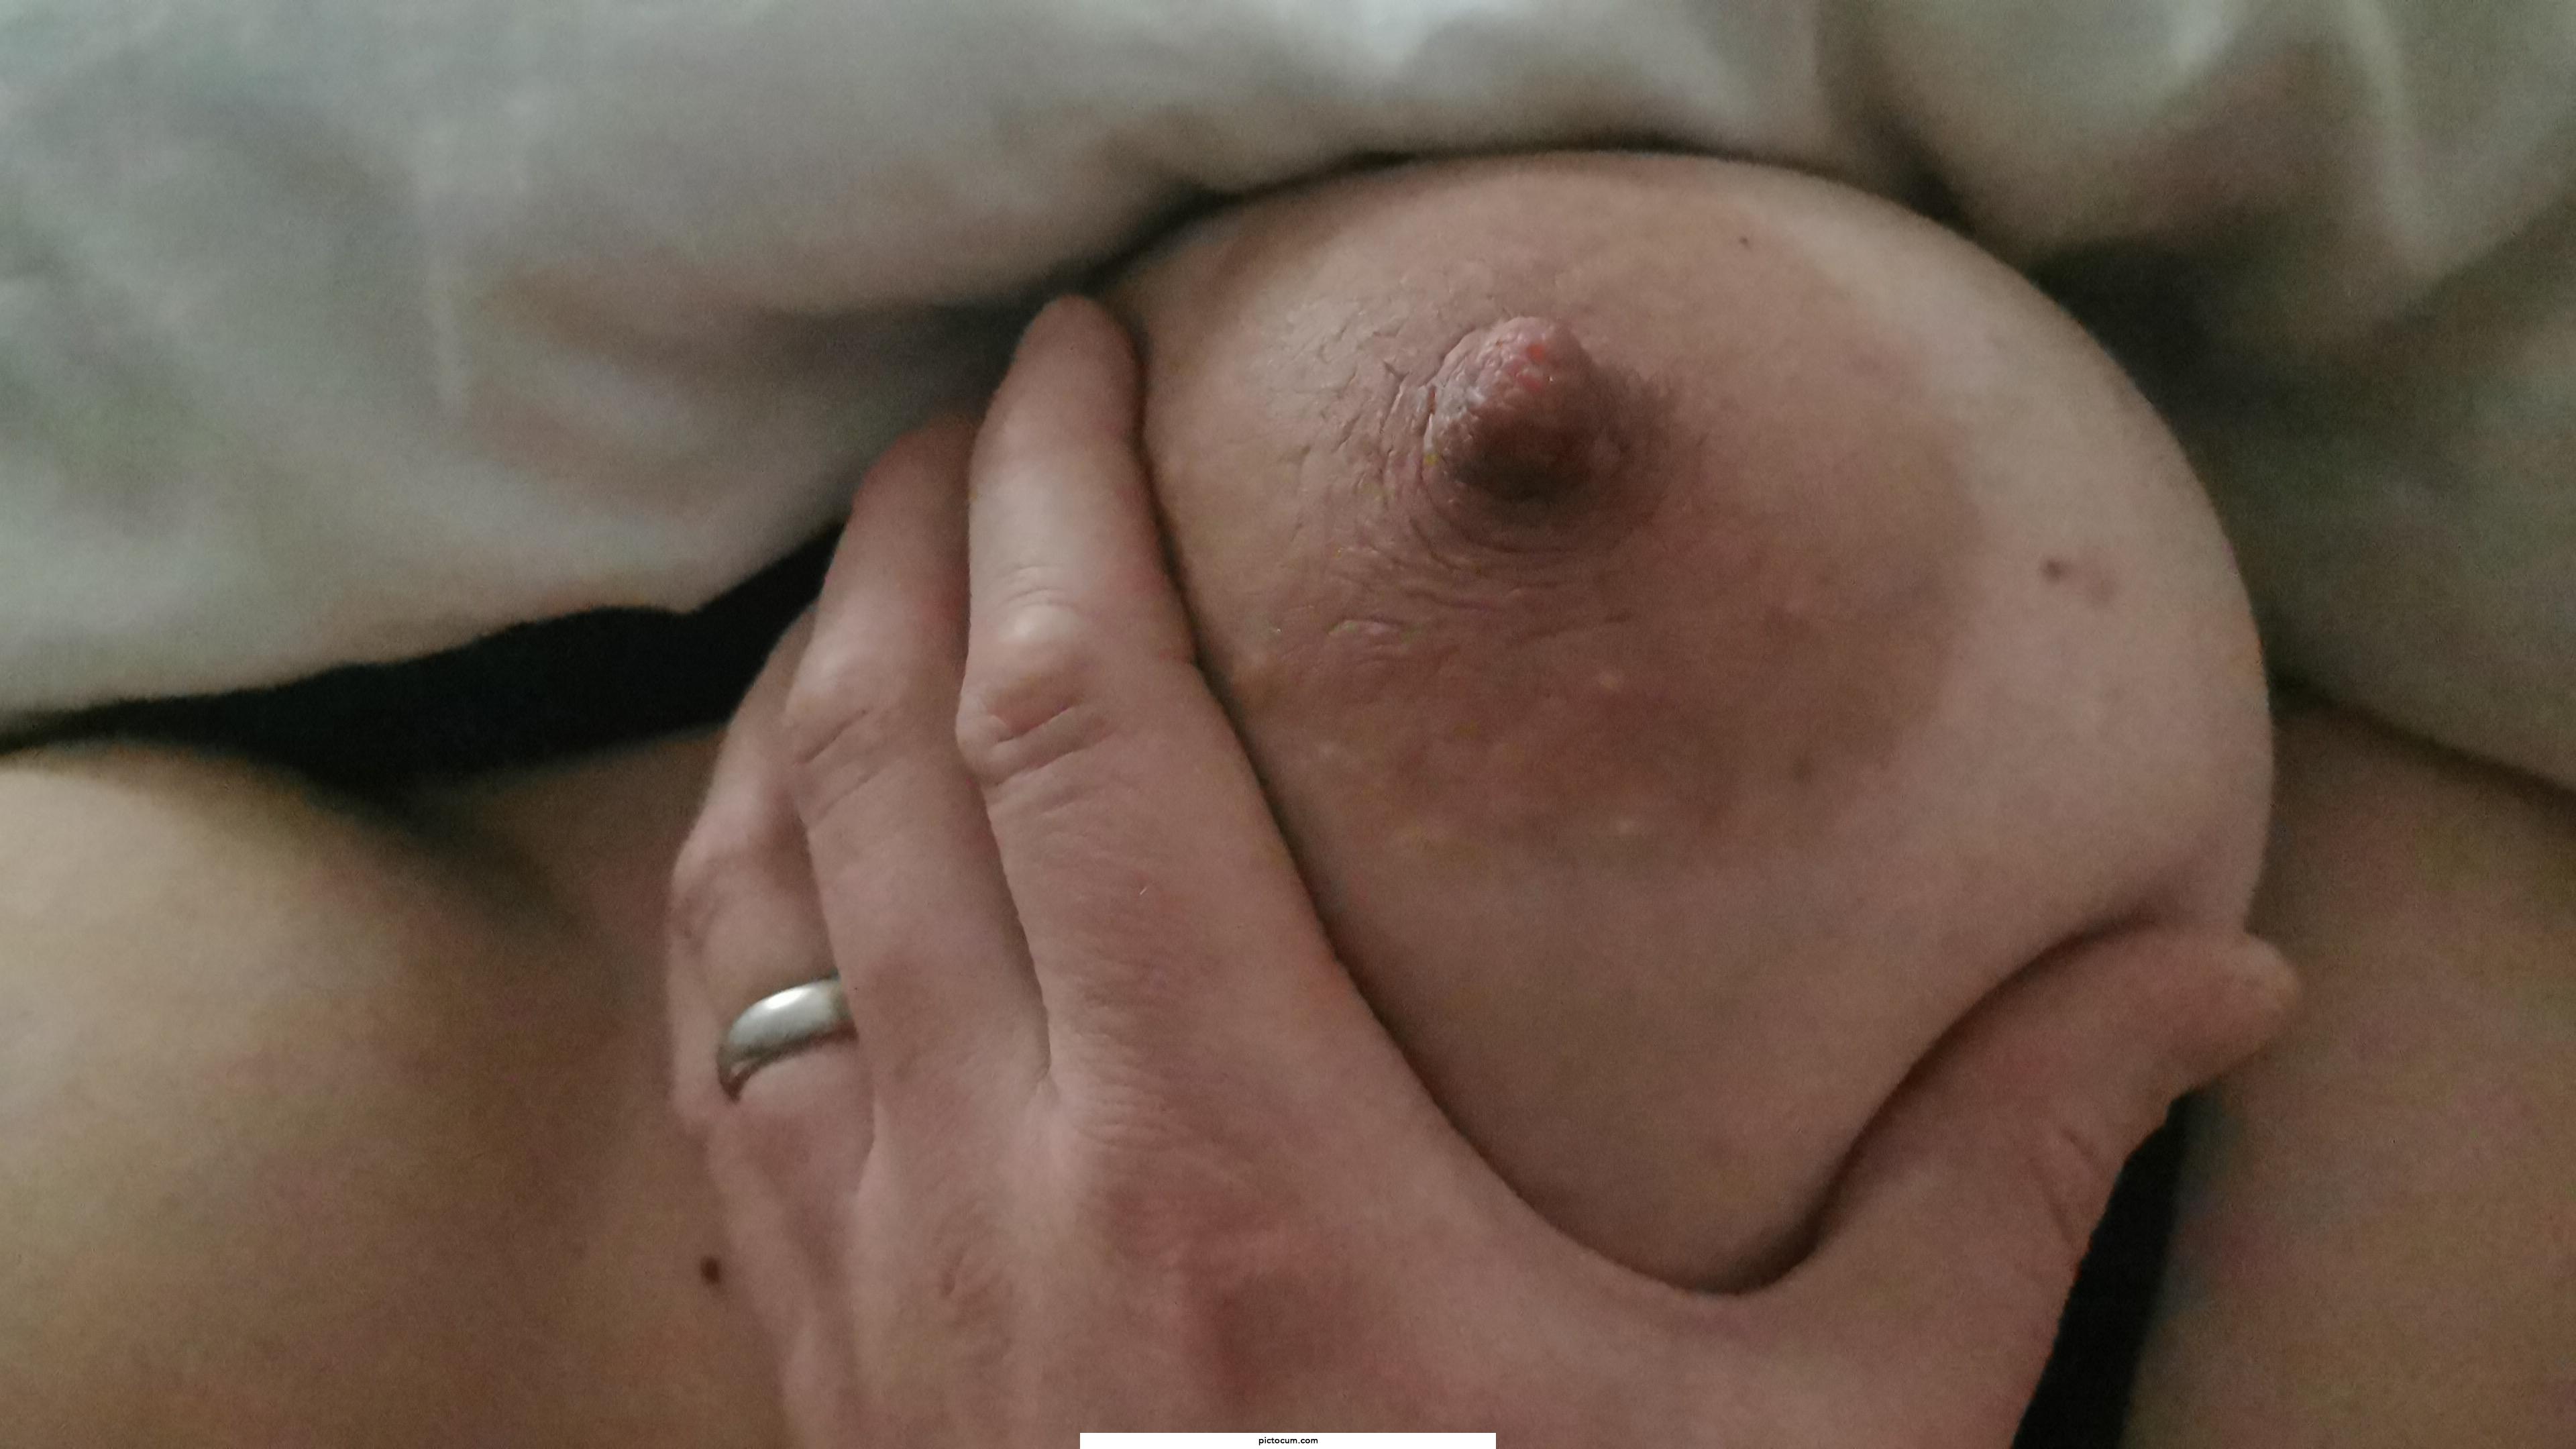 You know you're a cuck, when it's your birthday and your beautiful hotwife still refuses to let you have sex with her and instead only allows you to hold her huge tits while her pussy is fucked by her favourite toy.